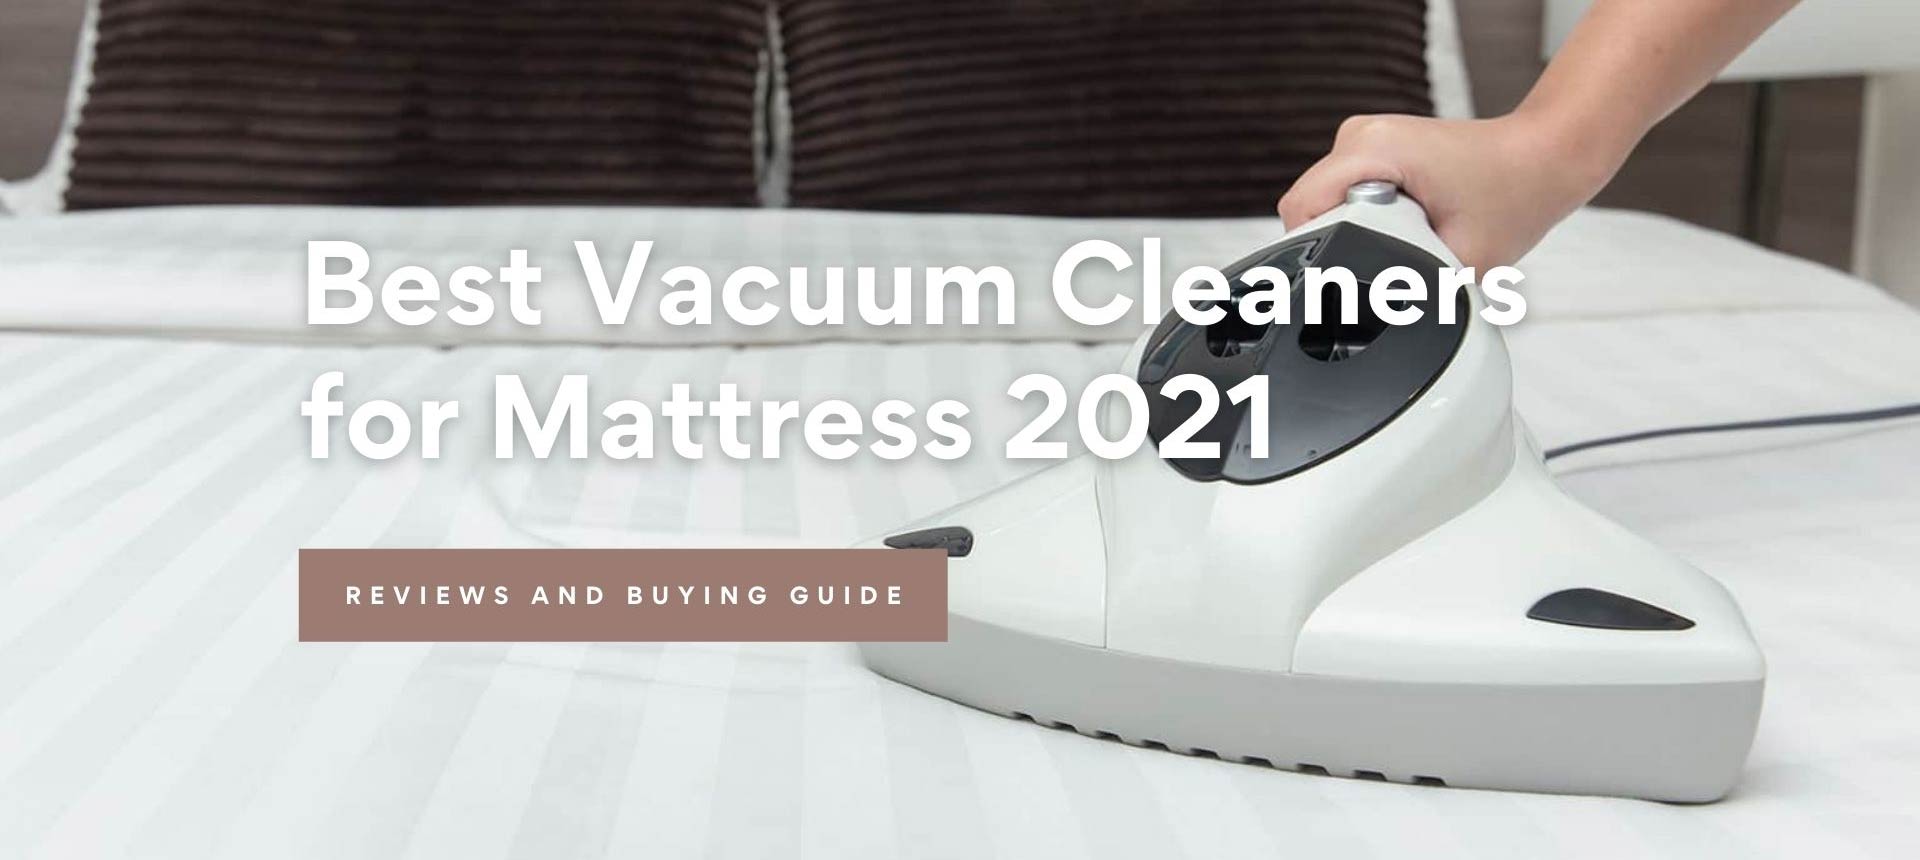 Best Vacuum Cleaners for Mattress 2021